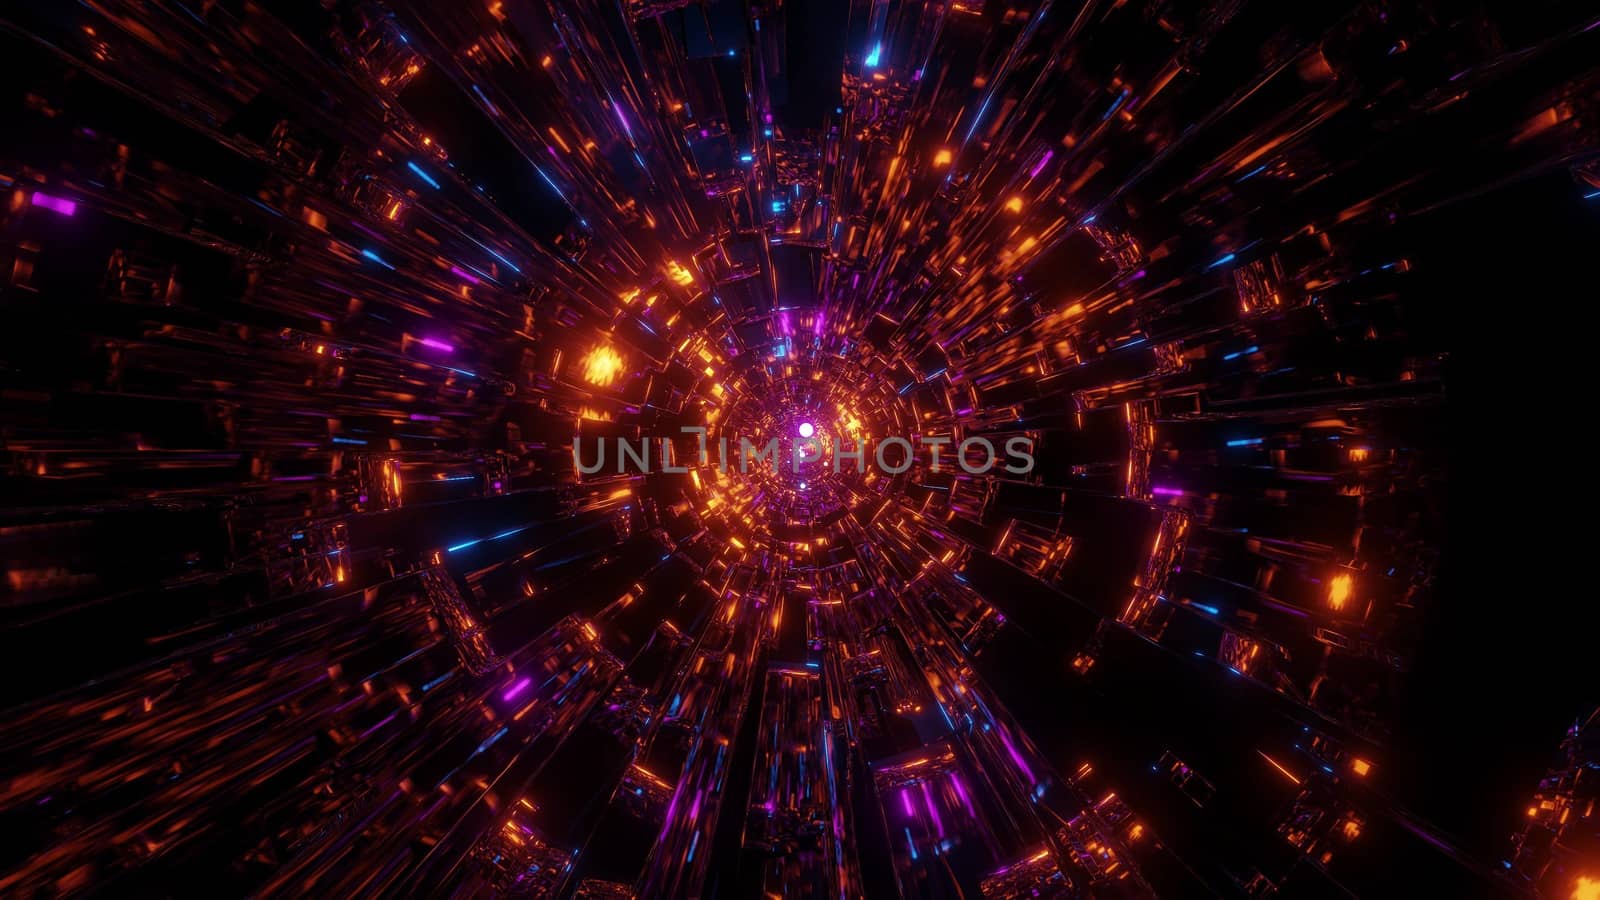 creative endless abstract reflection pattern graphic artwork with glowing spheres fly through 3d illustration design background wallpaper, abstract colorful tunnel 3d rendering design,